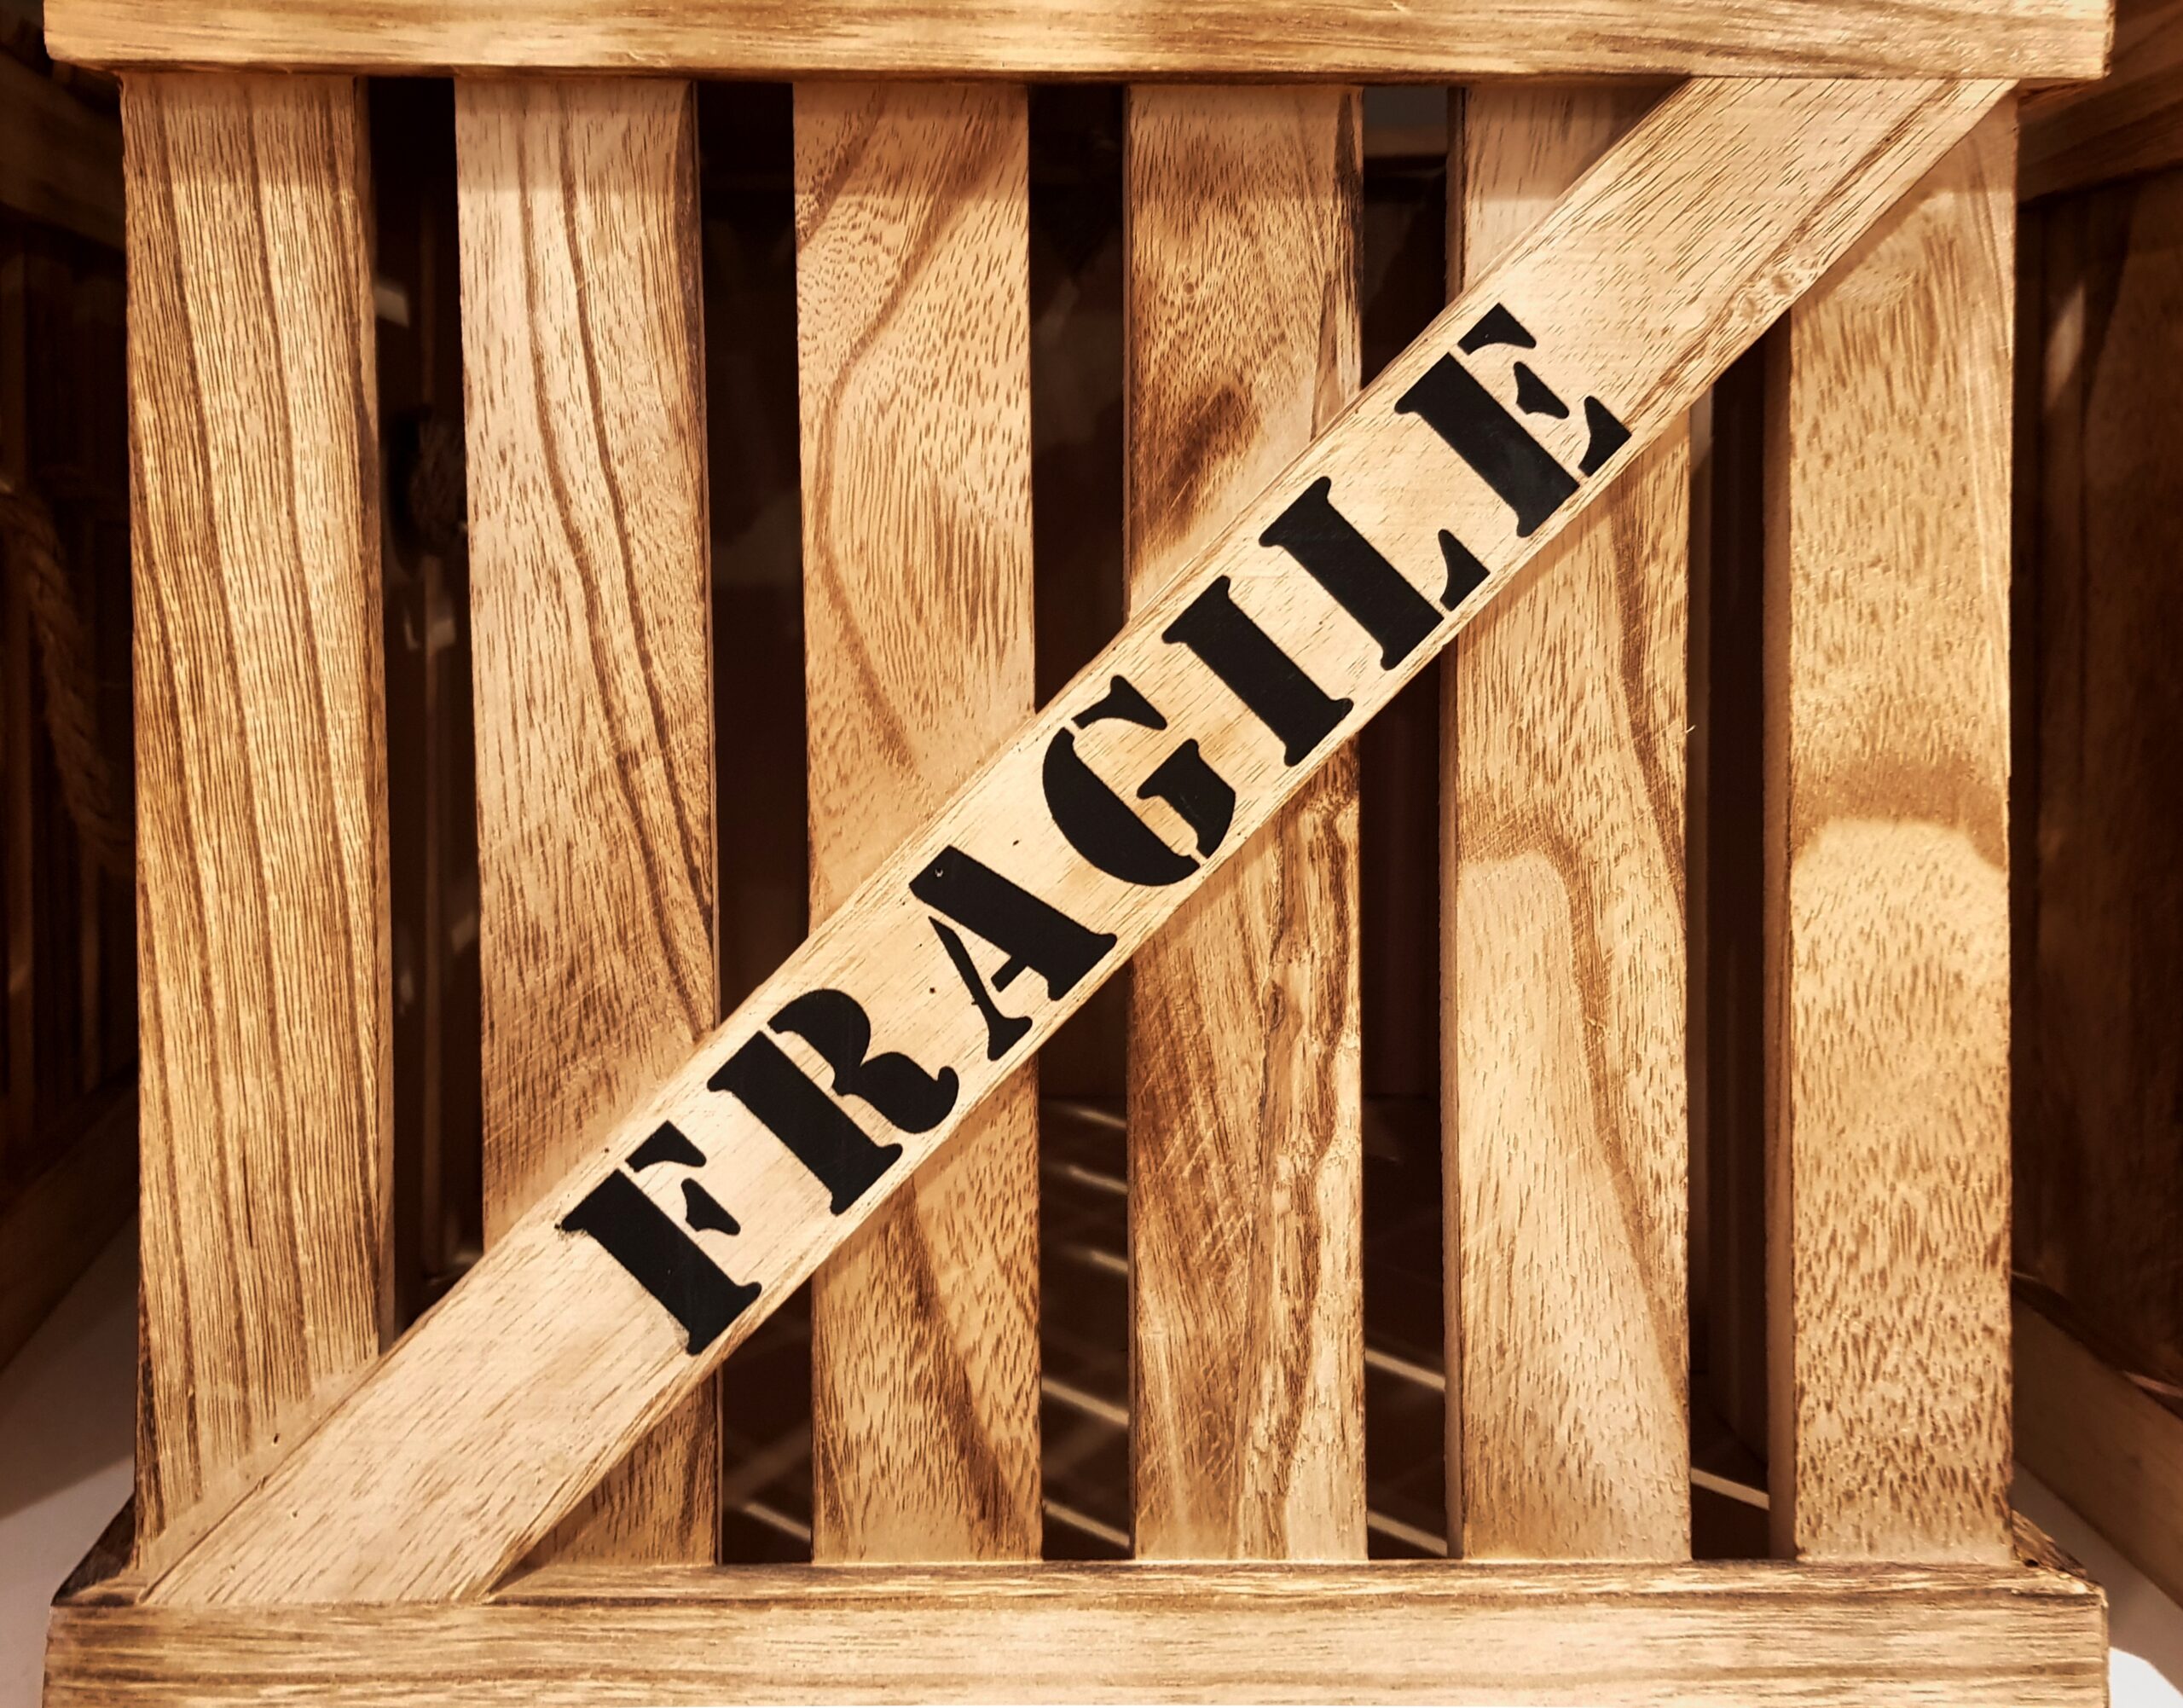 Beginner’s Guide to Safely Crating Fragile Items